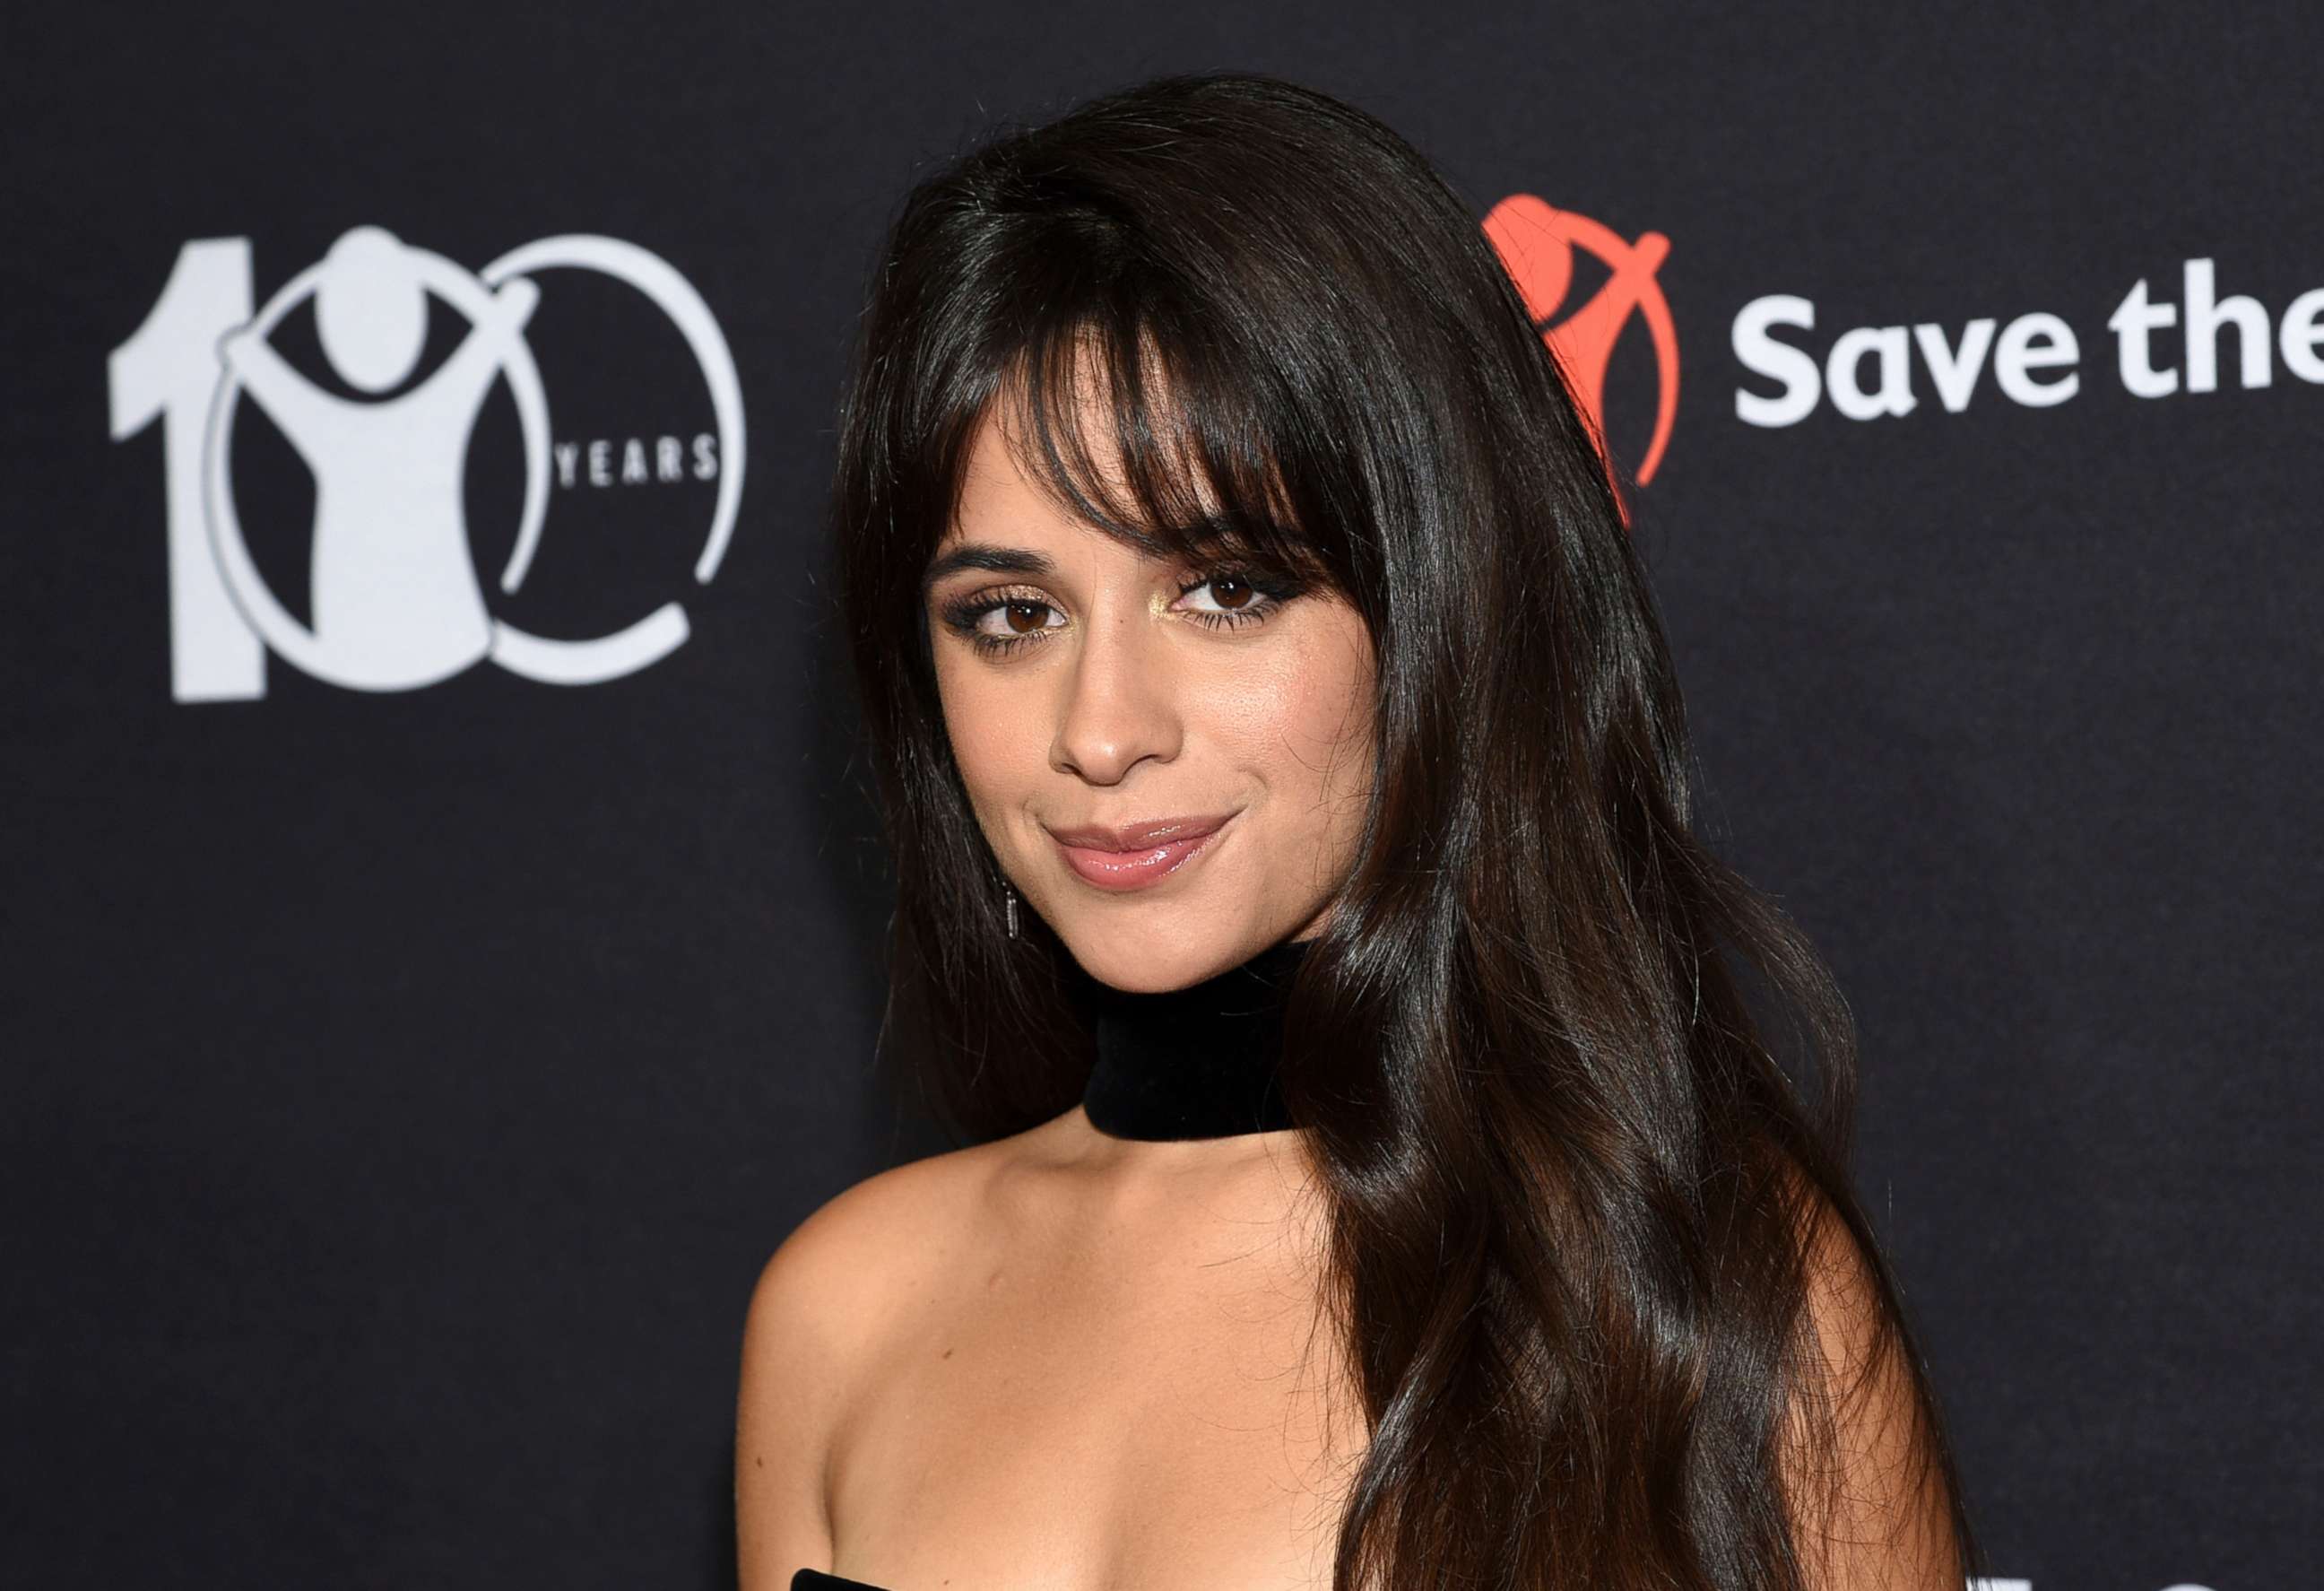 PHOTO: Camila Cabello at the Save the Children's "The Centennial Gala: Changing the World for Children" event in New York.